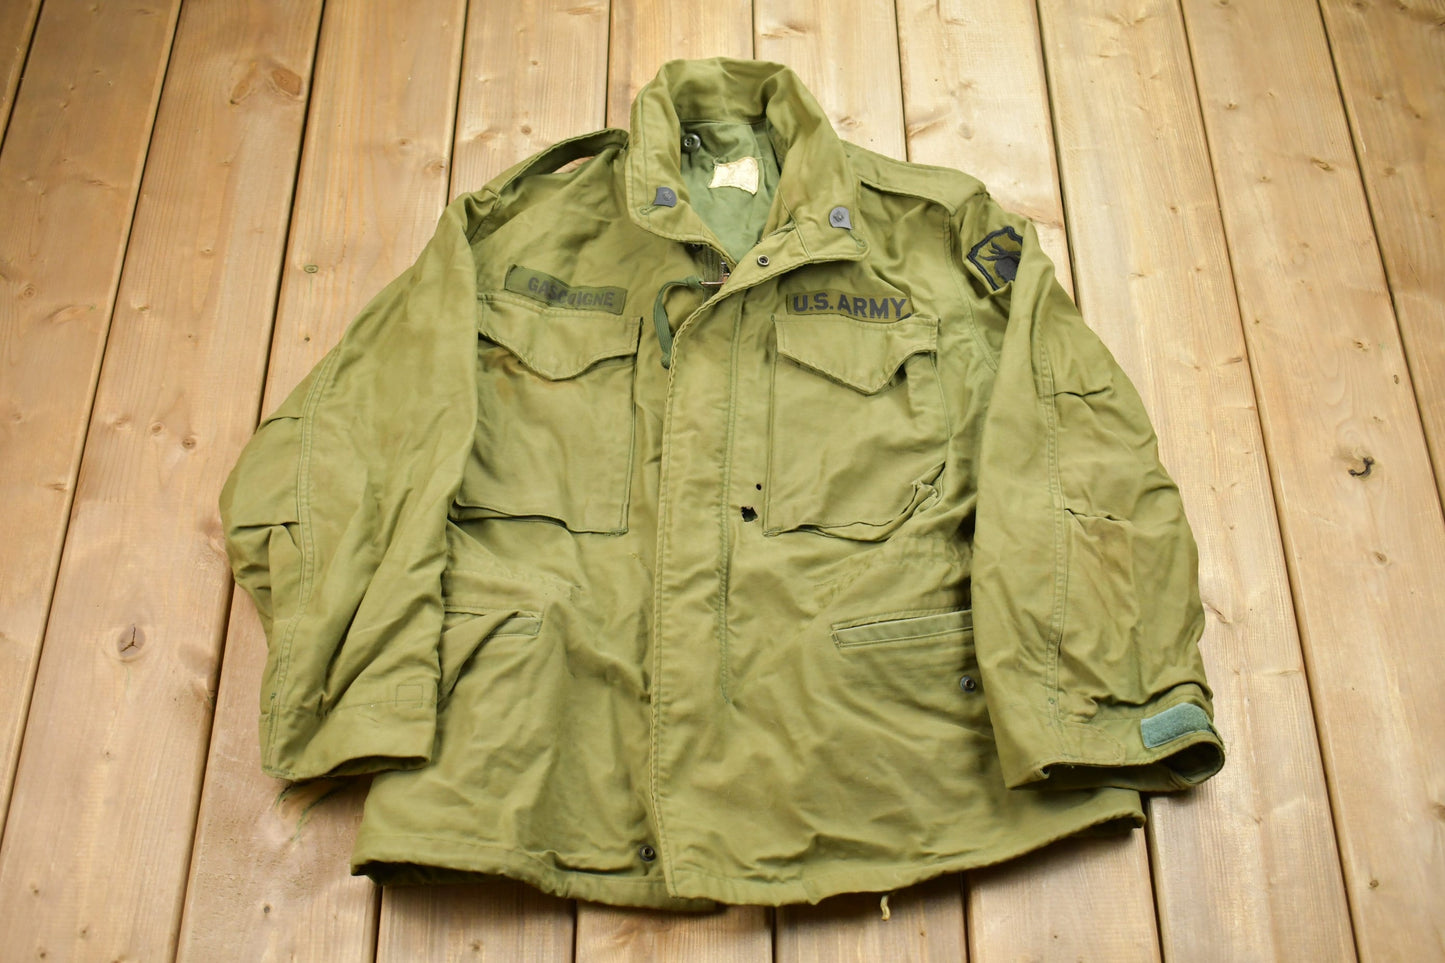 Vintage 1972 Military US Army Field Jacket / Button Up Jacket / US Army Green / Vintage Army / Streetwear Fashion / Army Jacket